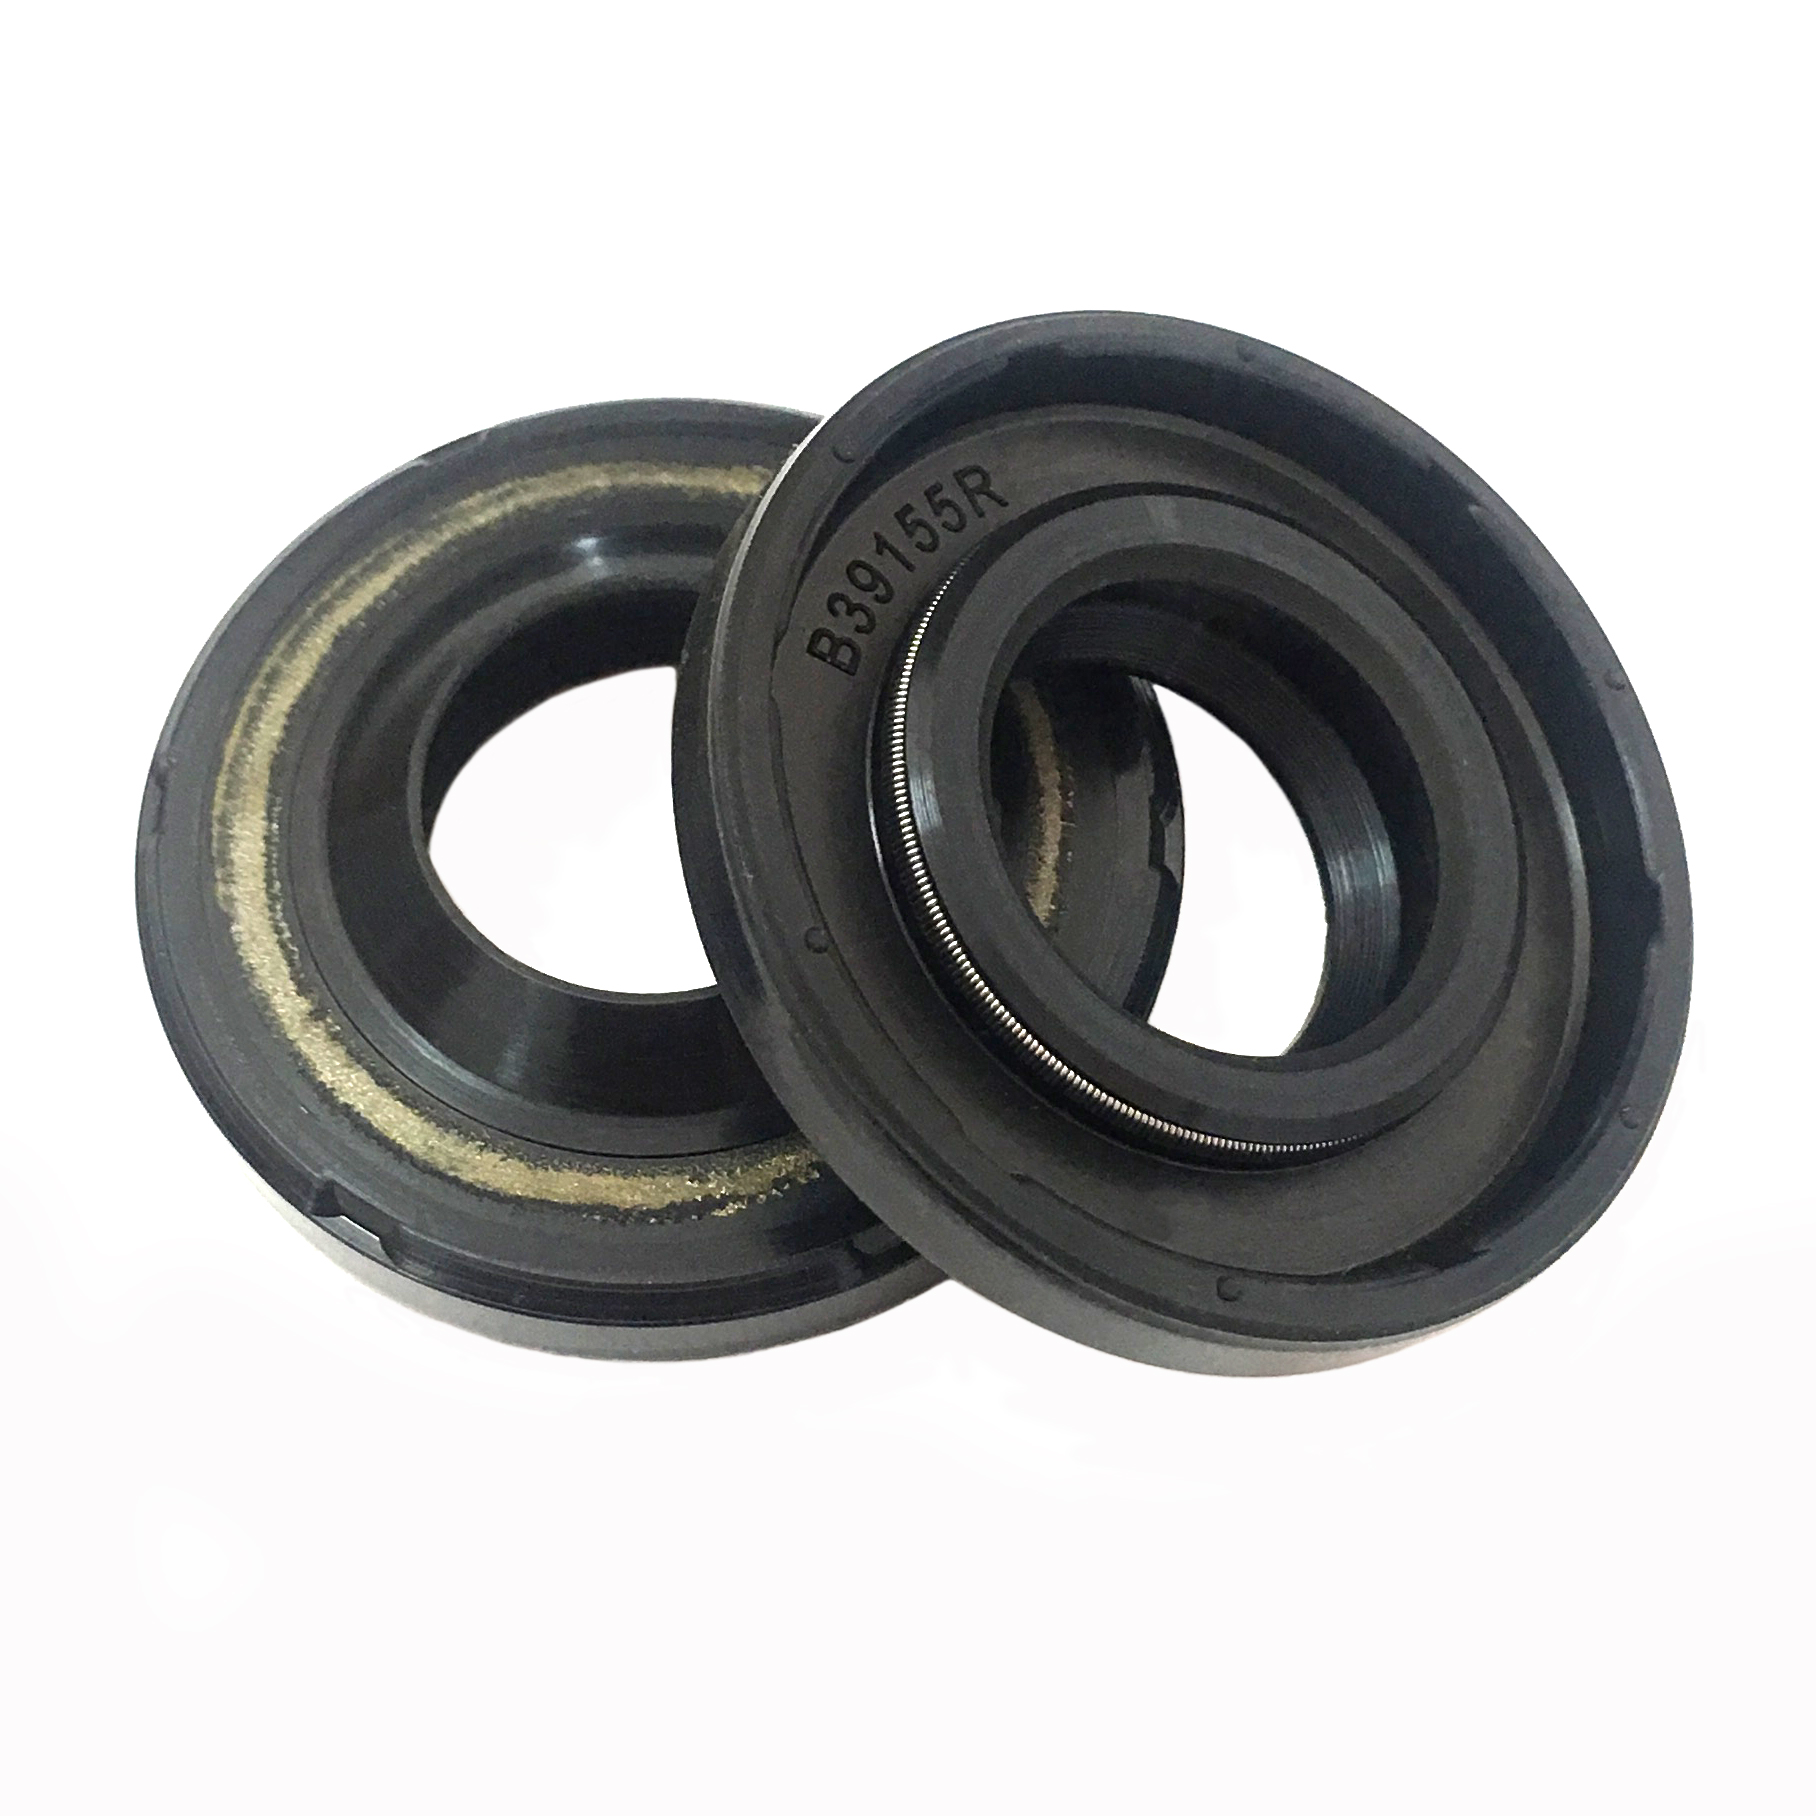 Power Steering Oil Seal B39155R 20.6*41.3*6.5/8 F-00493 nh1540x 3760672 For Ford FUSION